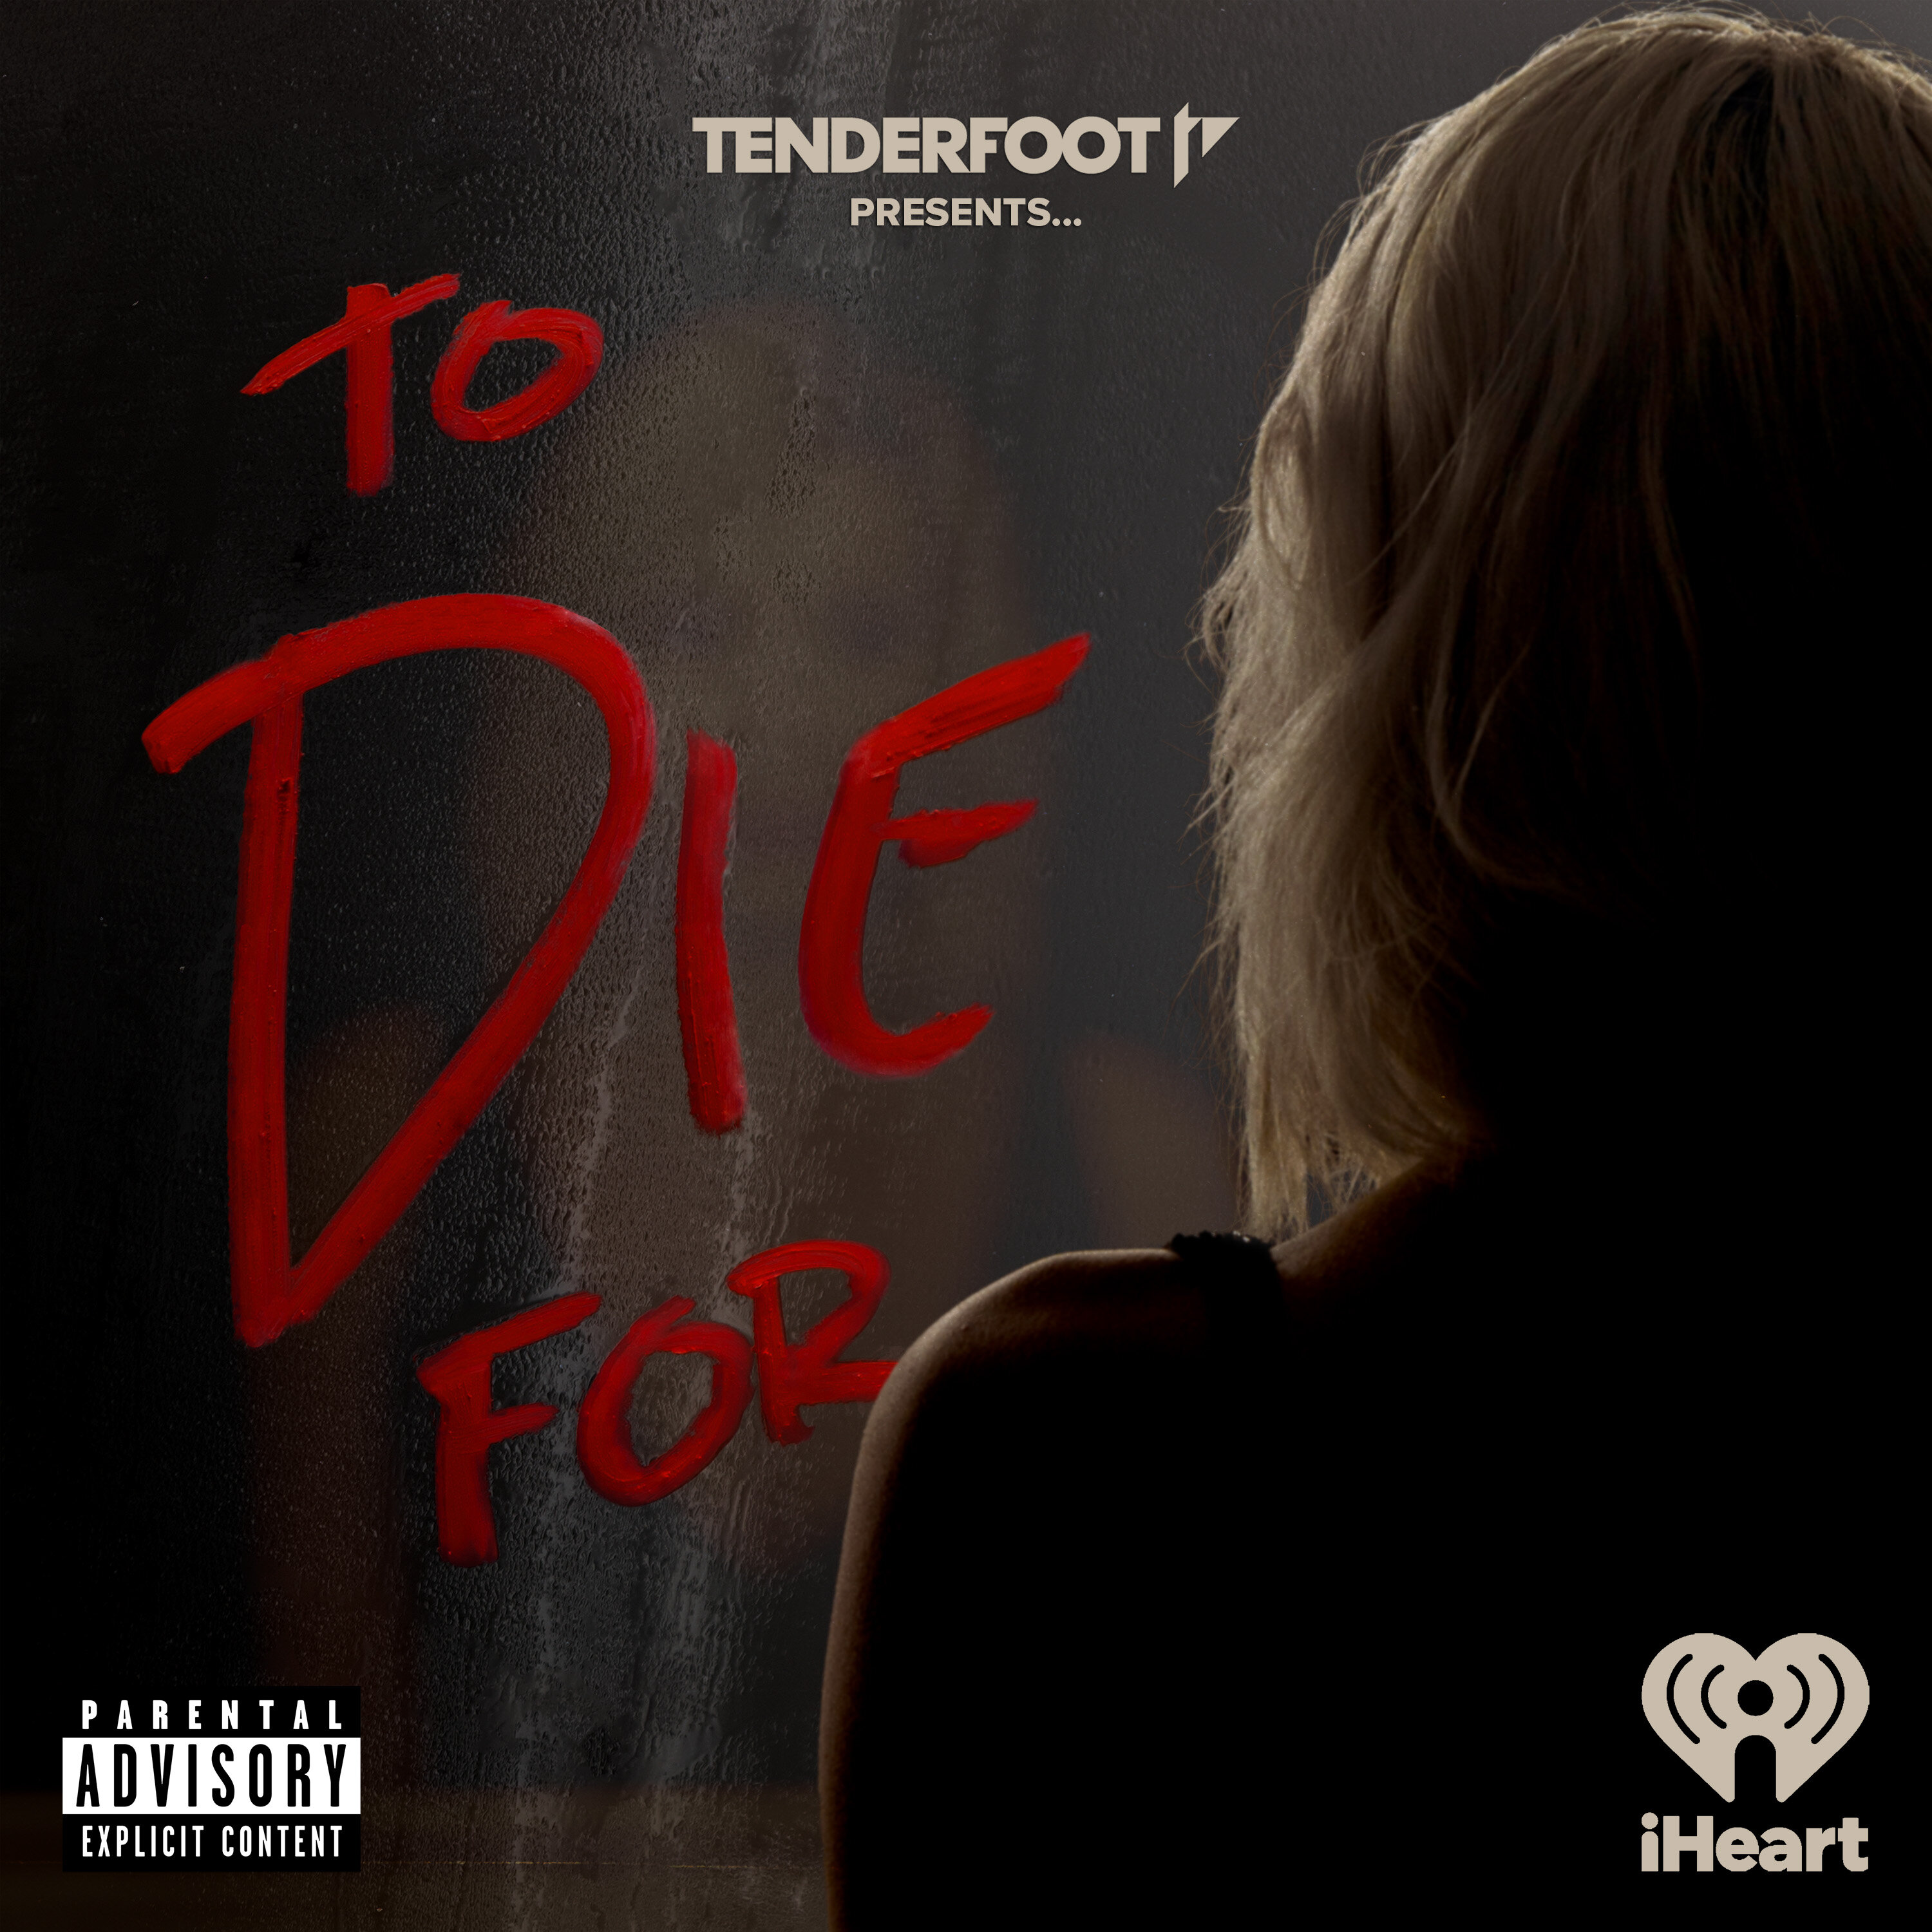 Official Trailer: To Die For by Tenderfoot TV and iHeartPodcasts